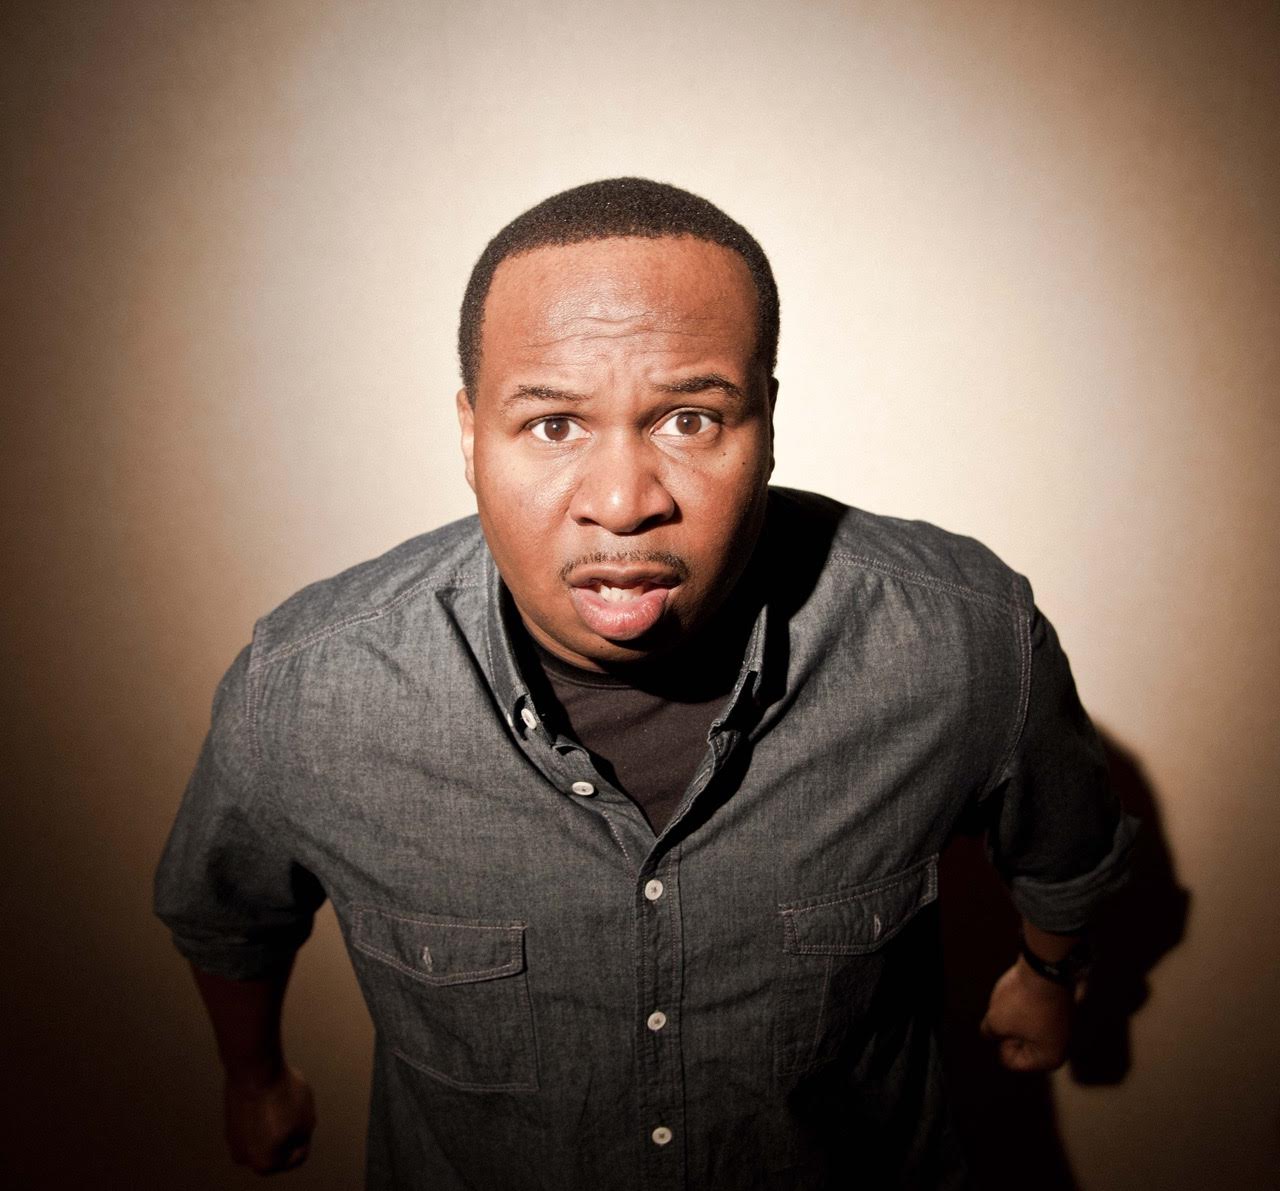 Roy Wood Jr. talks Nov. 12 & 13 dates at Gotham Comedy Club, working on “The Daily Show” & more